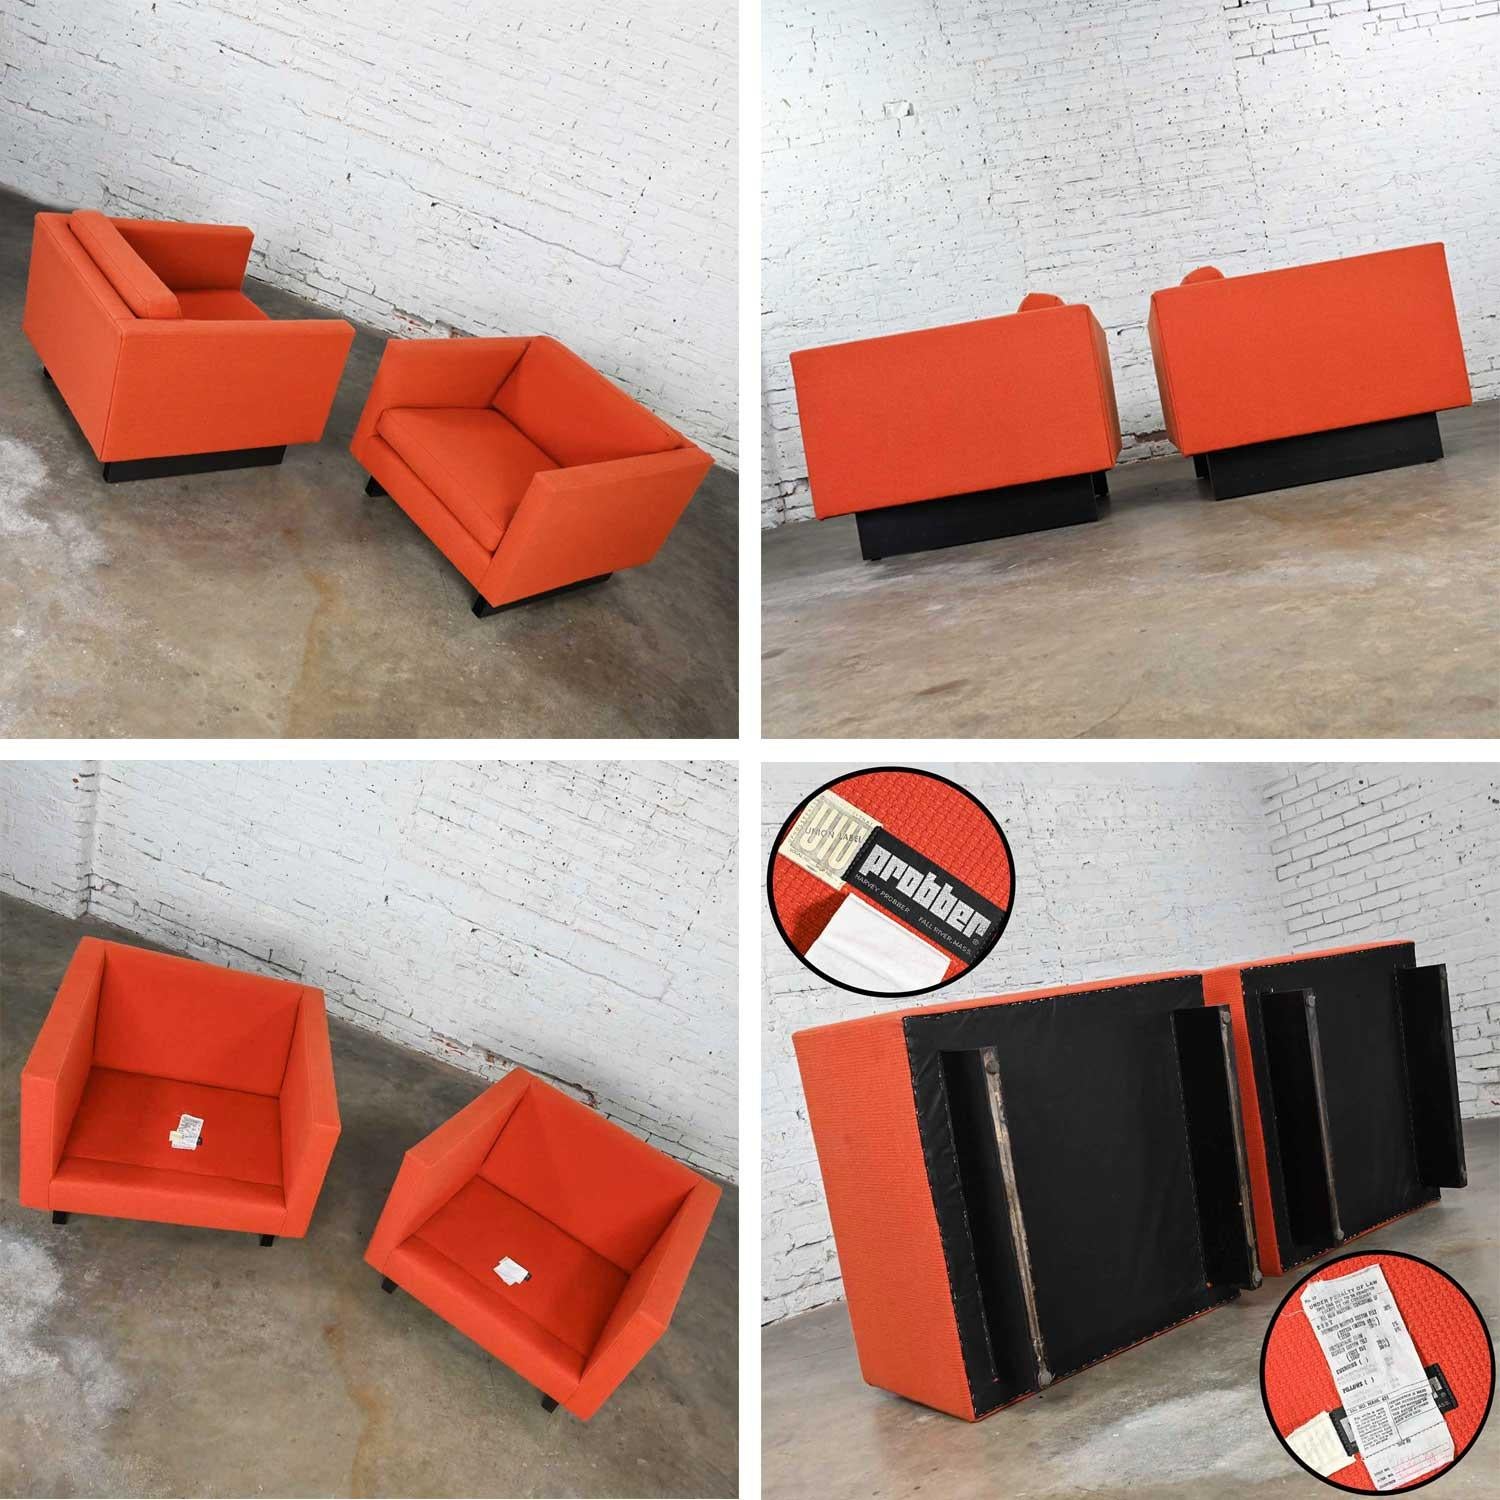 1970s Mcm to Modern Harvey Probber Club Chairs Orange 1571 Tuxedo Sleigh Bases For Sale 10